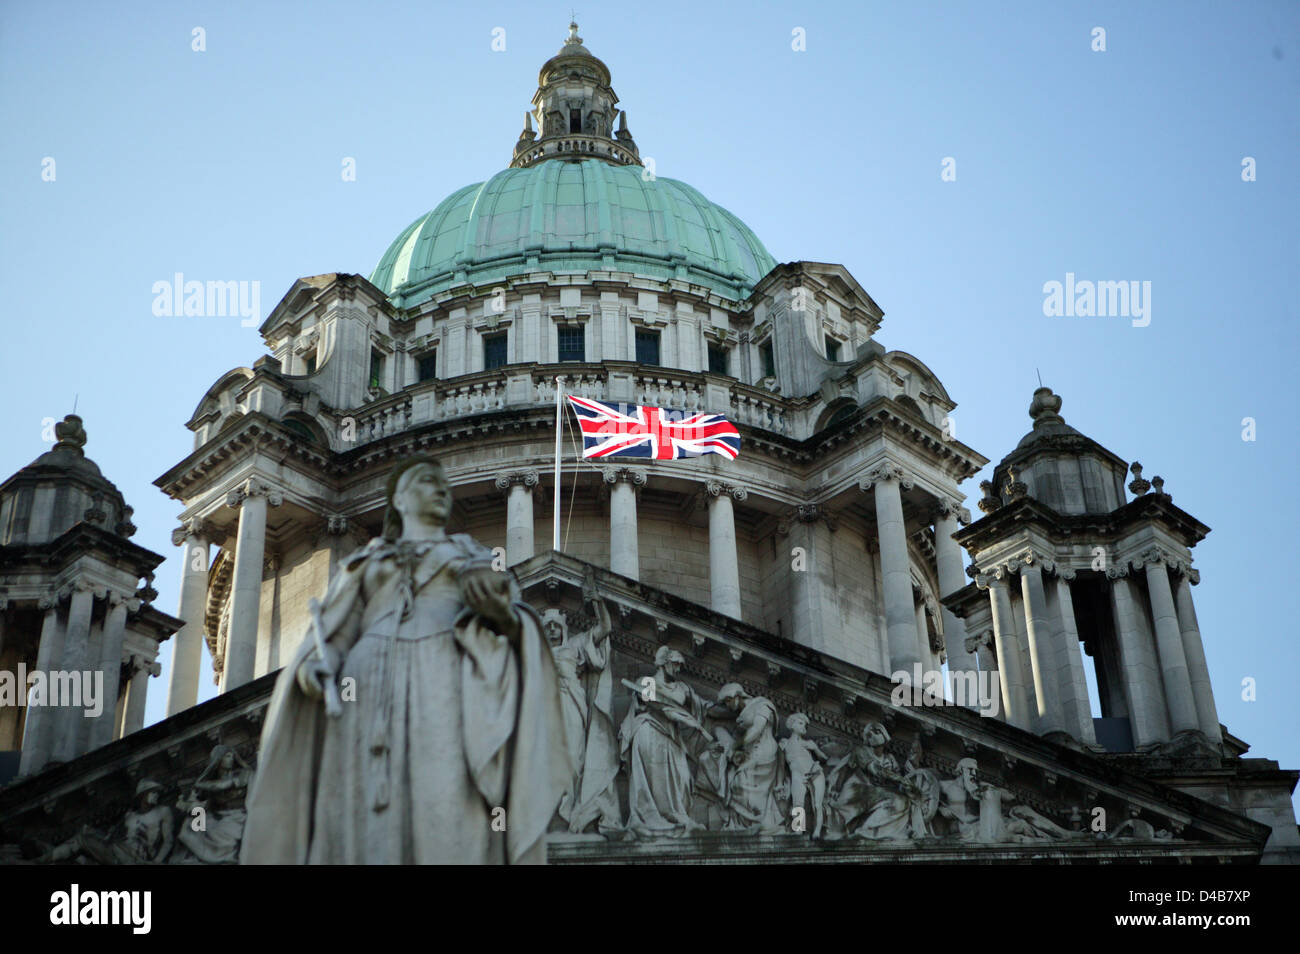 Belfast, UK. 11th March, 2013. To mark Commonwealth Day the Union Flag is flown on Belfast City Hall. This is only one of seveneen days that the Union Flag is flown. The change from 365 days to 17 has caused division in political parties. Belfast City Council took the decision at the council meeting held on the 3rd December 2012. Since then there has been a weekly protest each Saturday outside the grounds of  City hall. Credit:  Bonzo / Alamy Live News Stock Photo